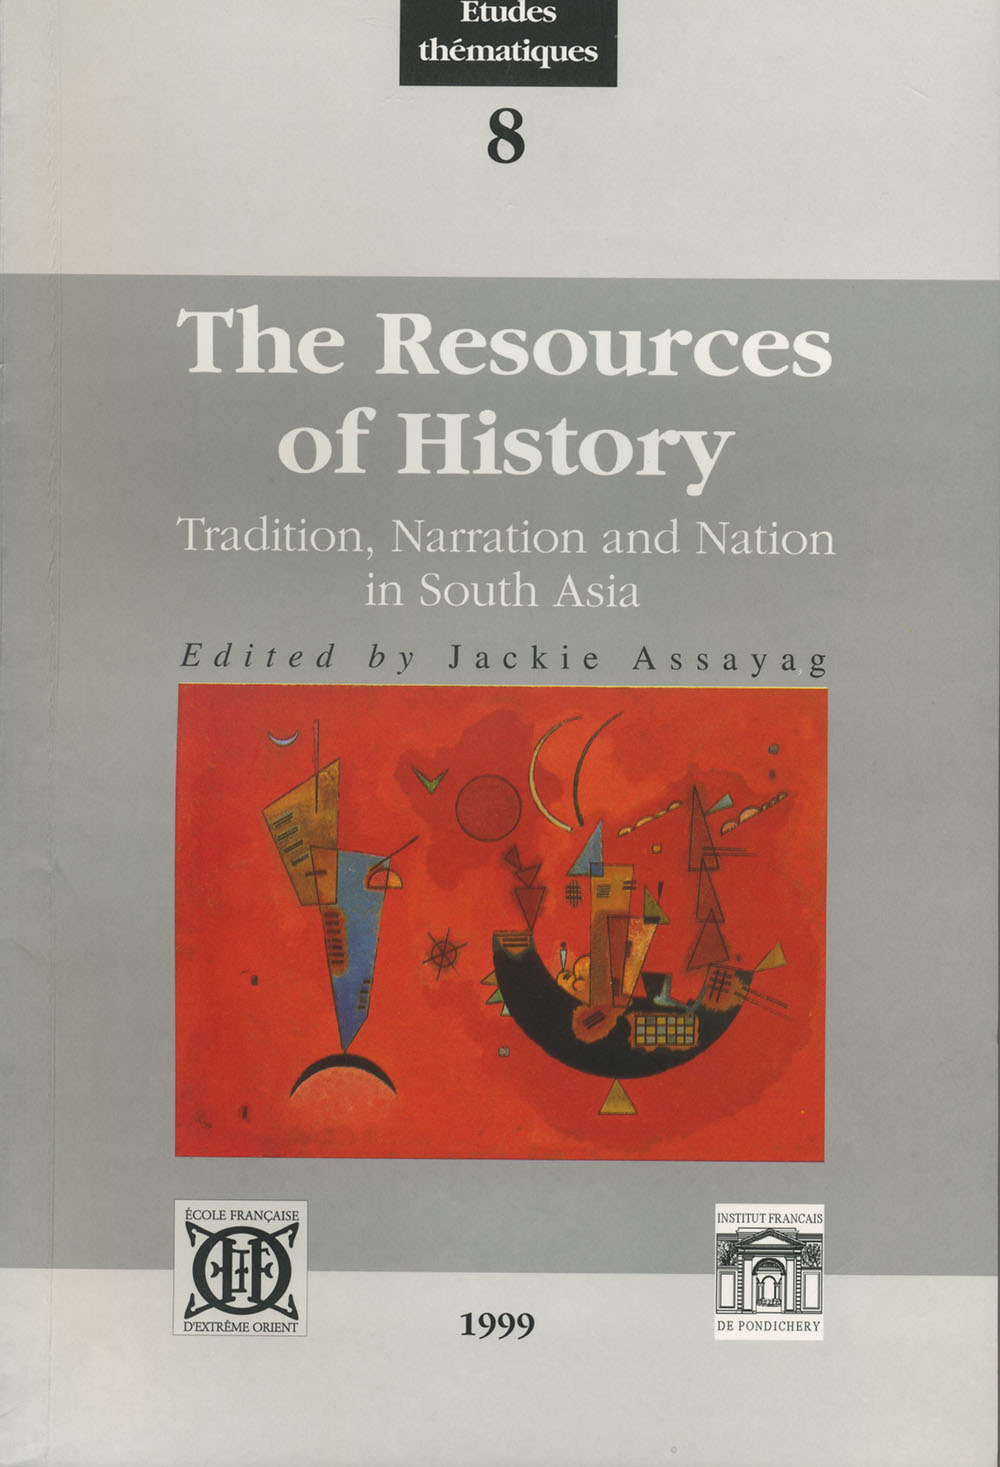 The Resources of History